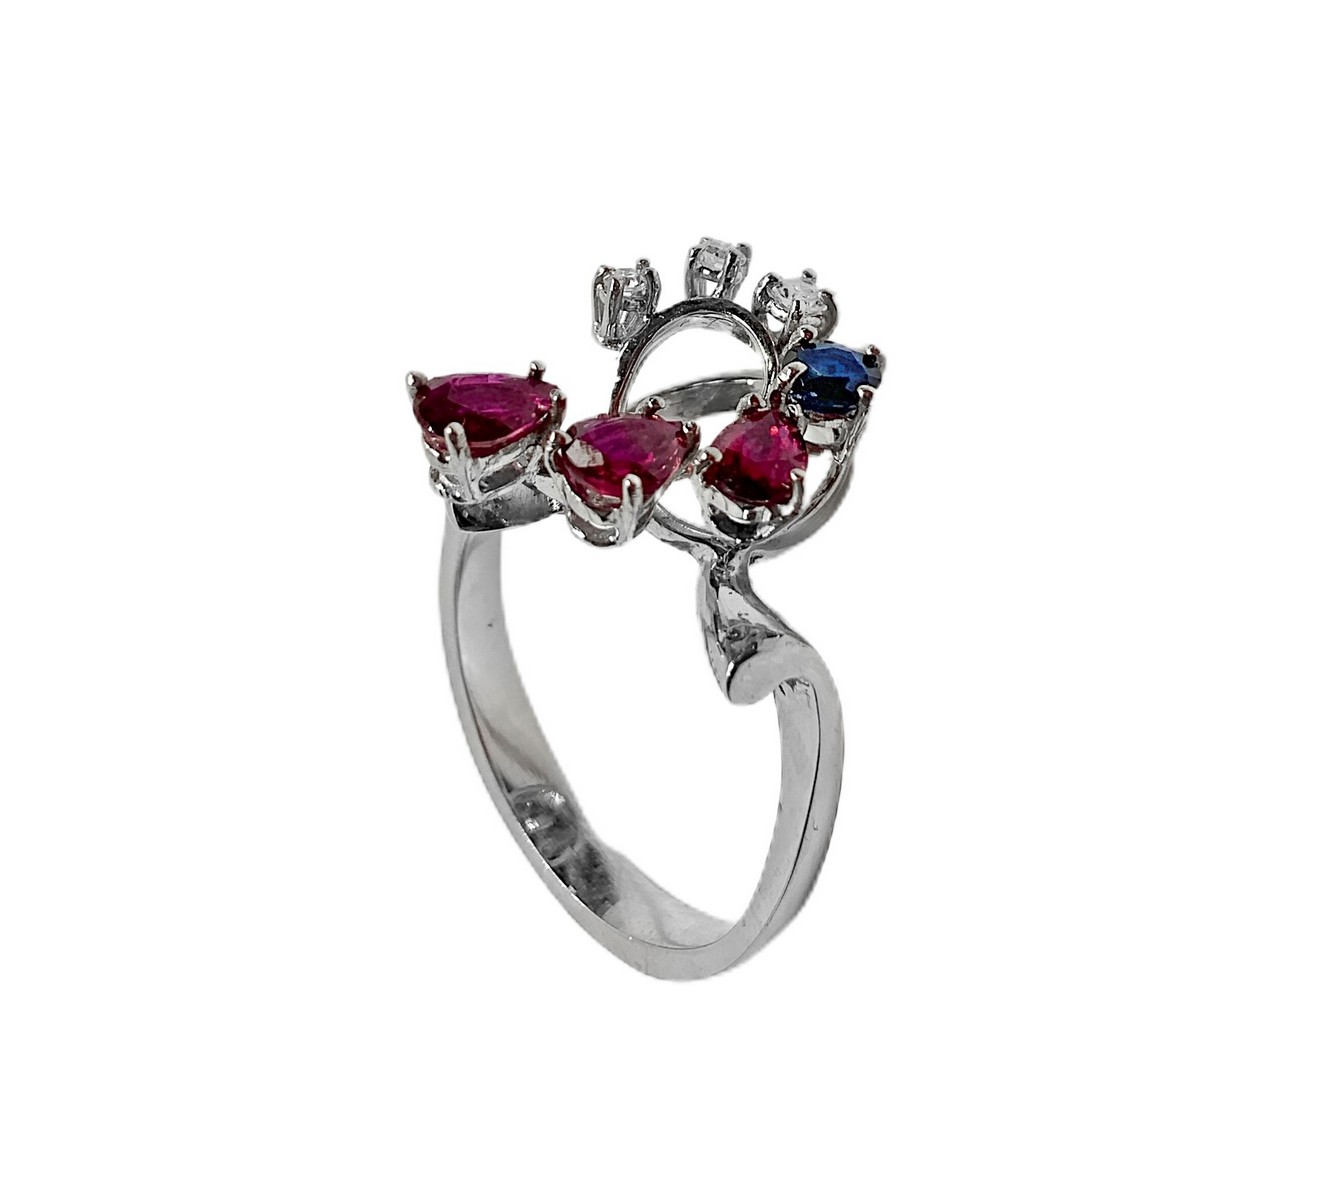 White gold ring with 3 rubies, 1 blue sapphire and 3 brilliants - Image 5 of 5